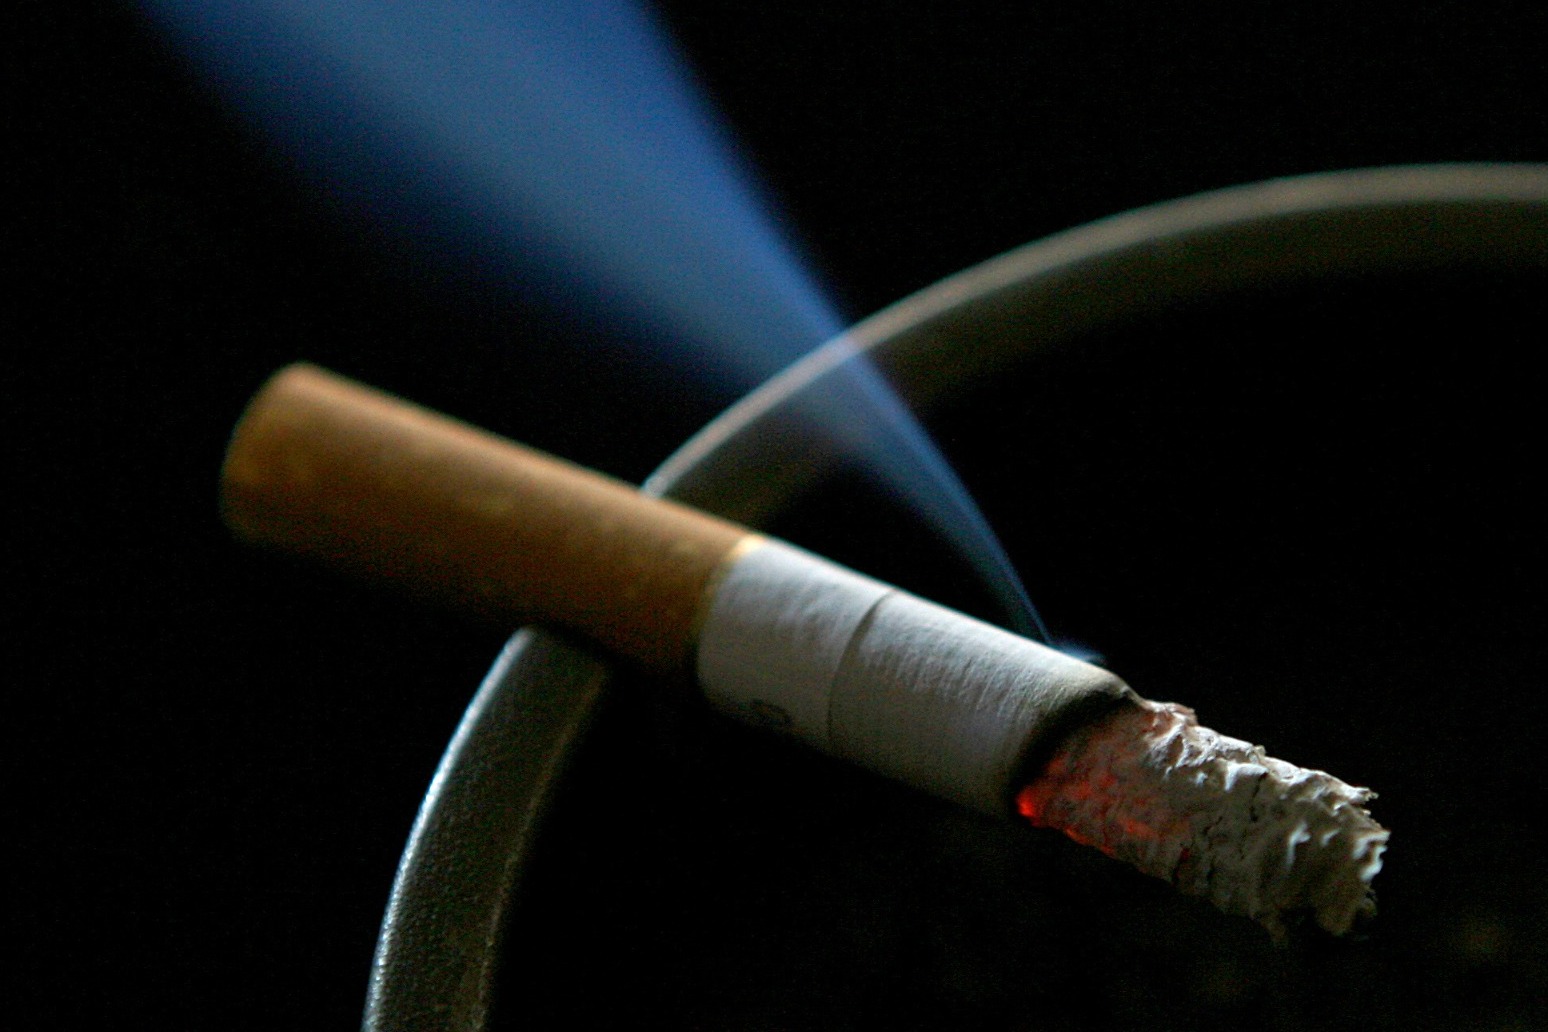 Legal age for smoking should rise and ‘polluter tax’ must be considered – report 